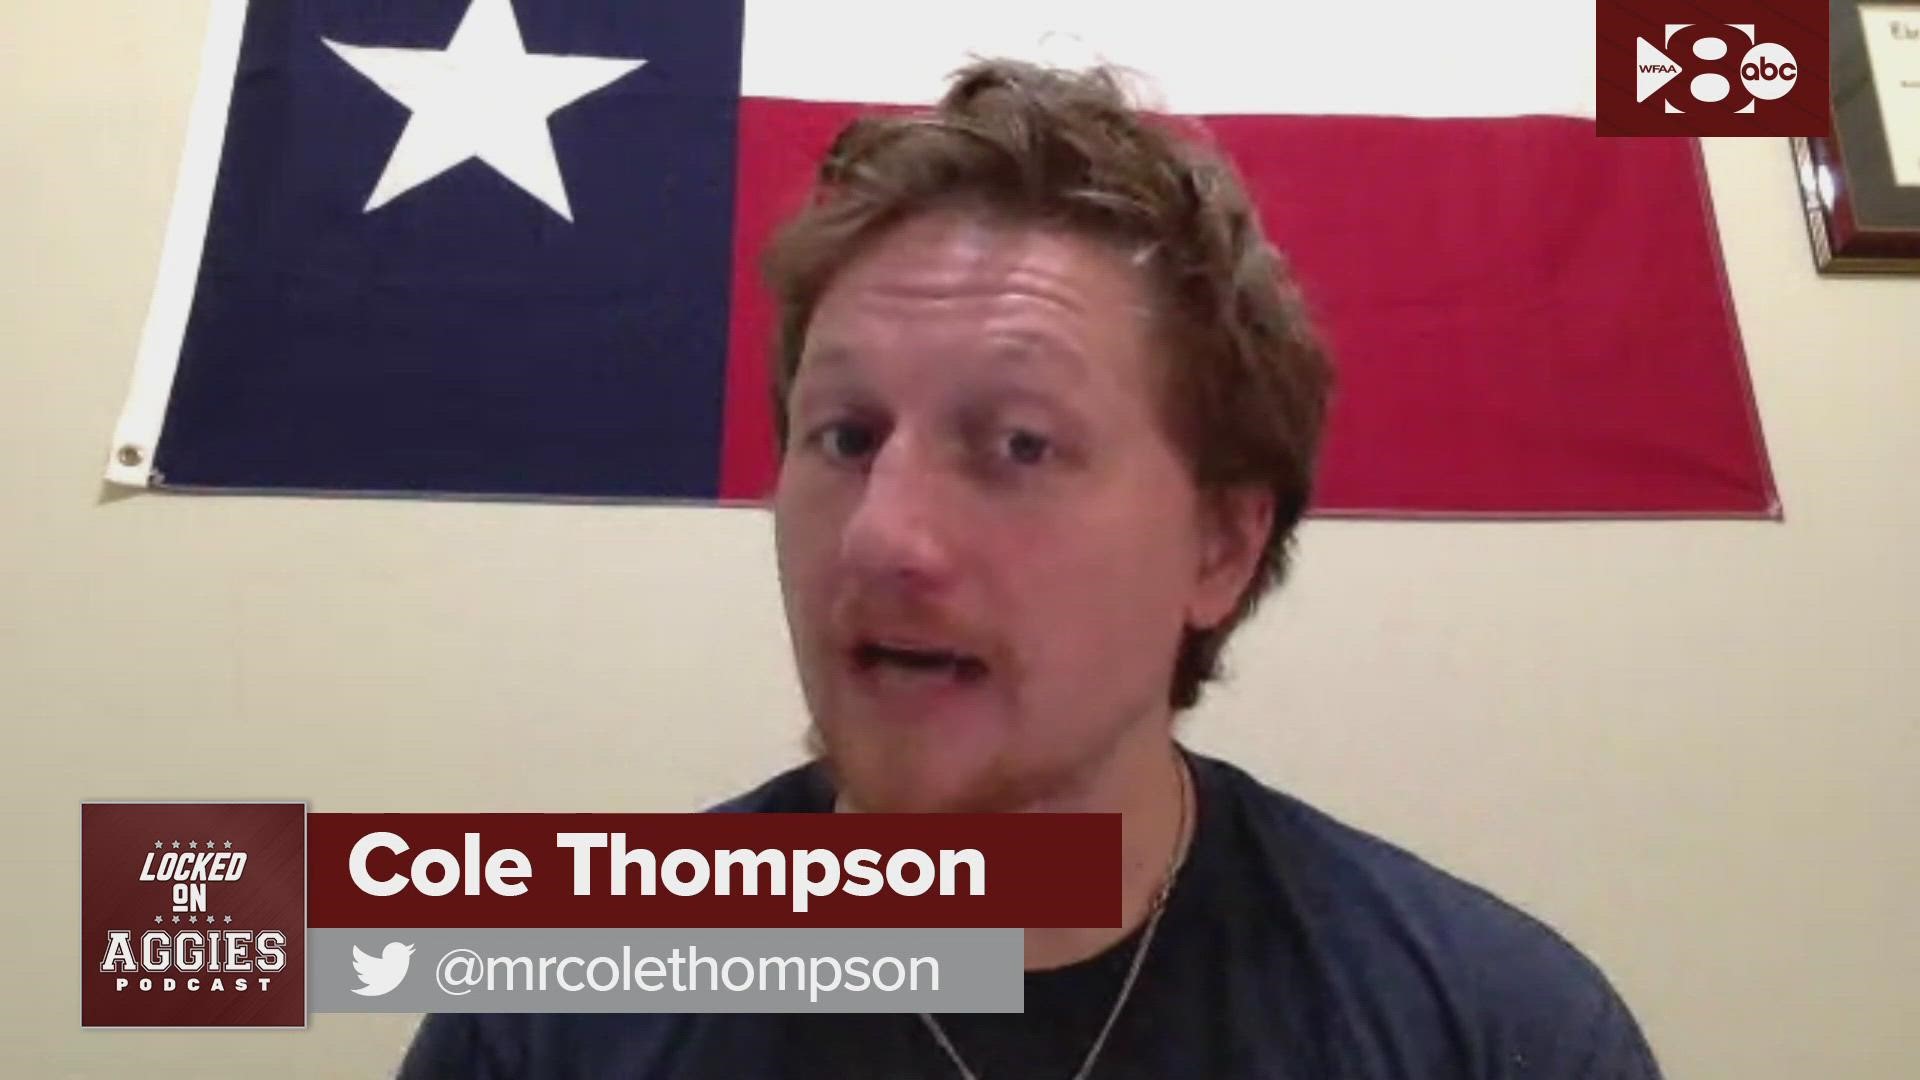 Locked On Aggies host Cole Thompson previews Texas A&M's season opener against Kent State